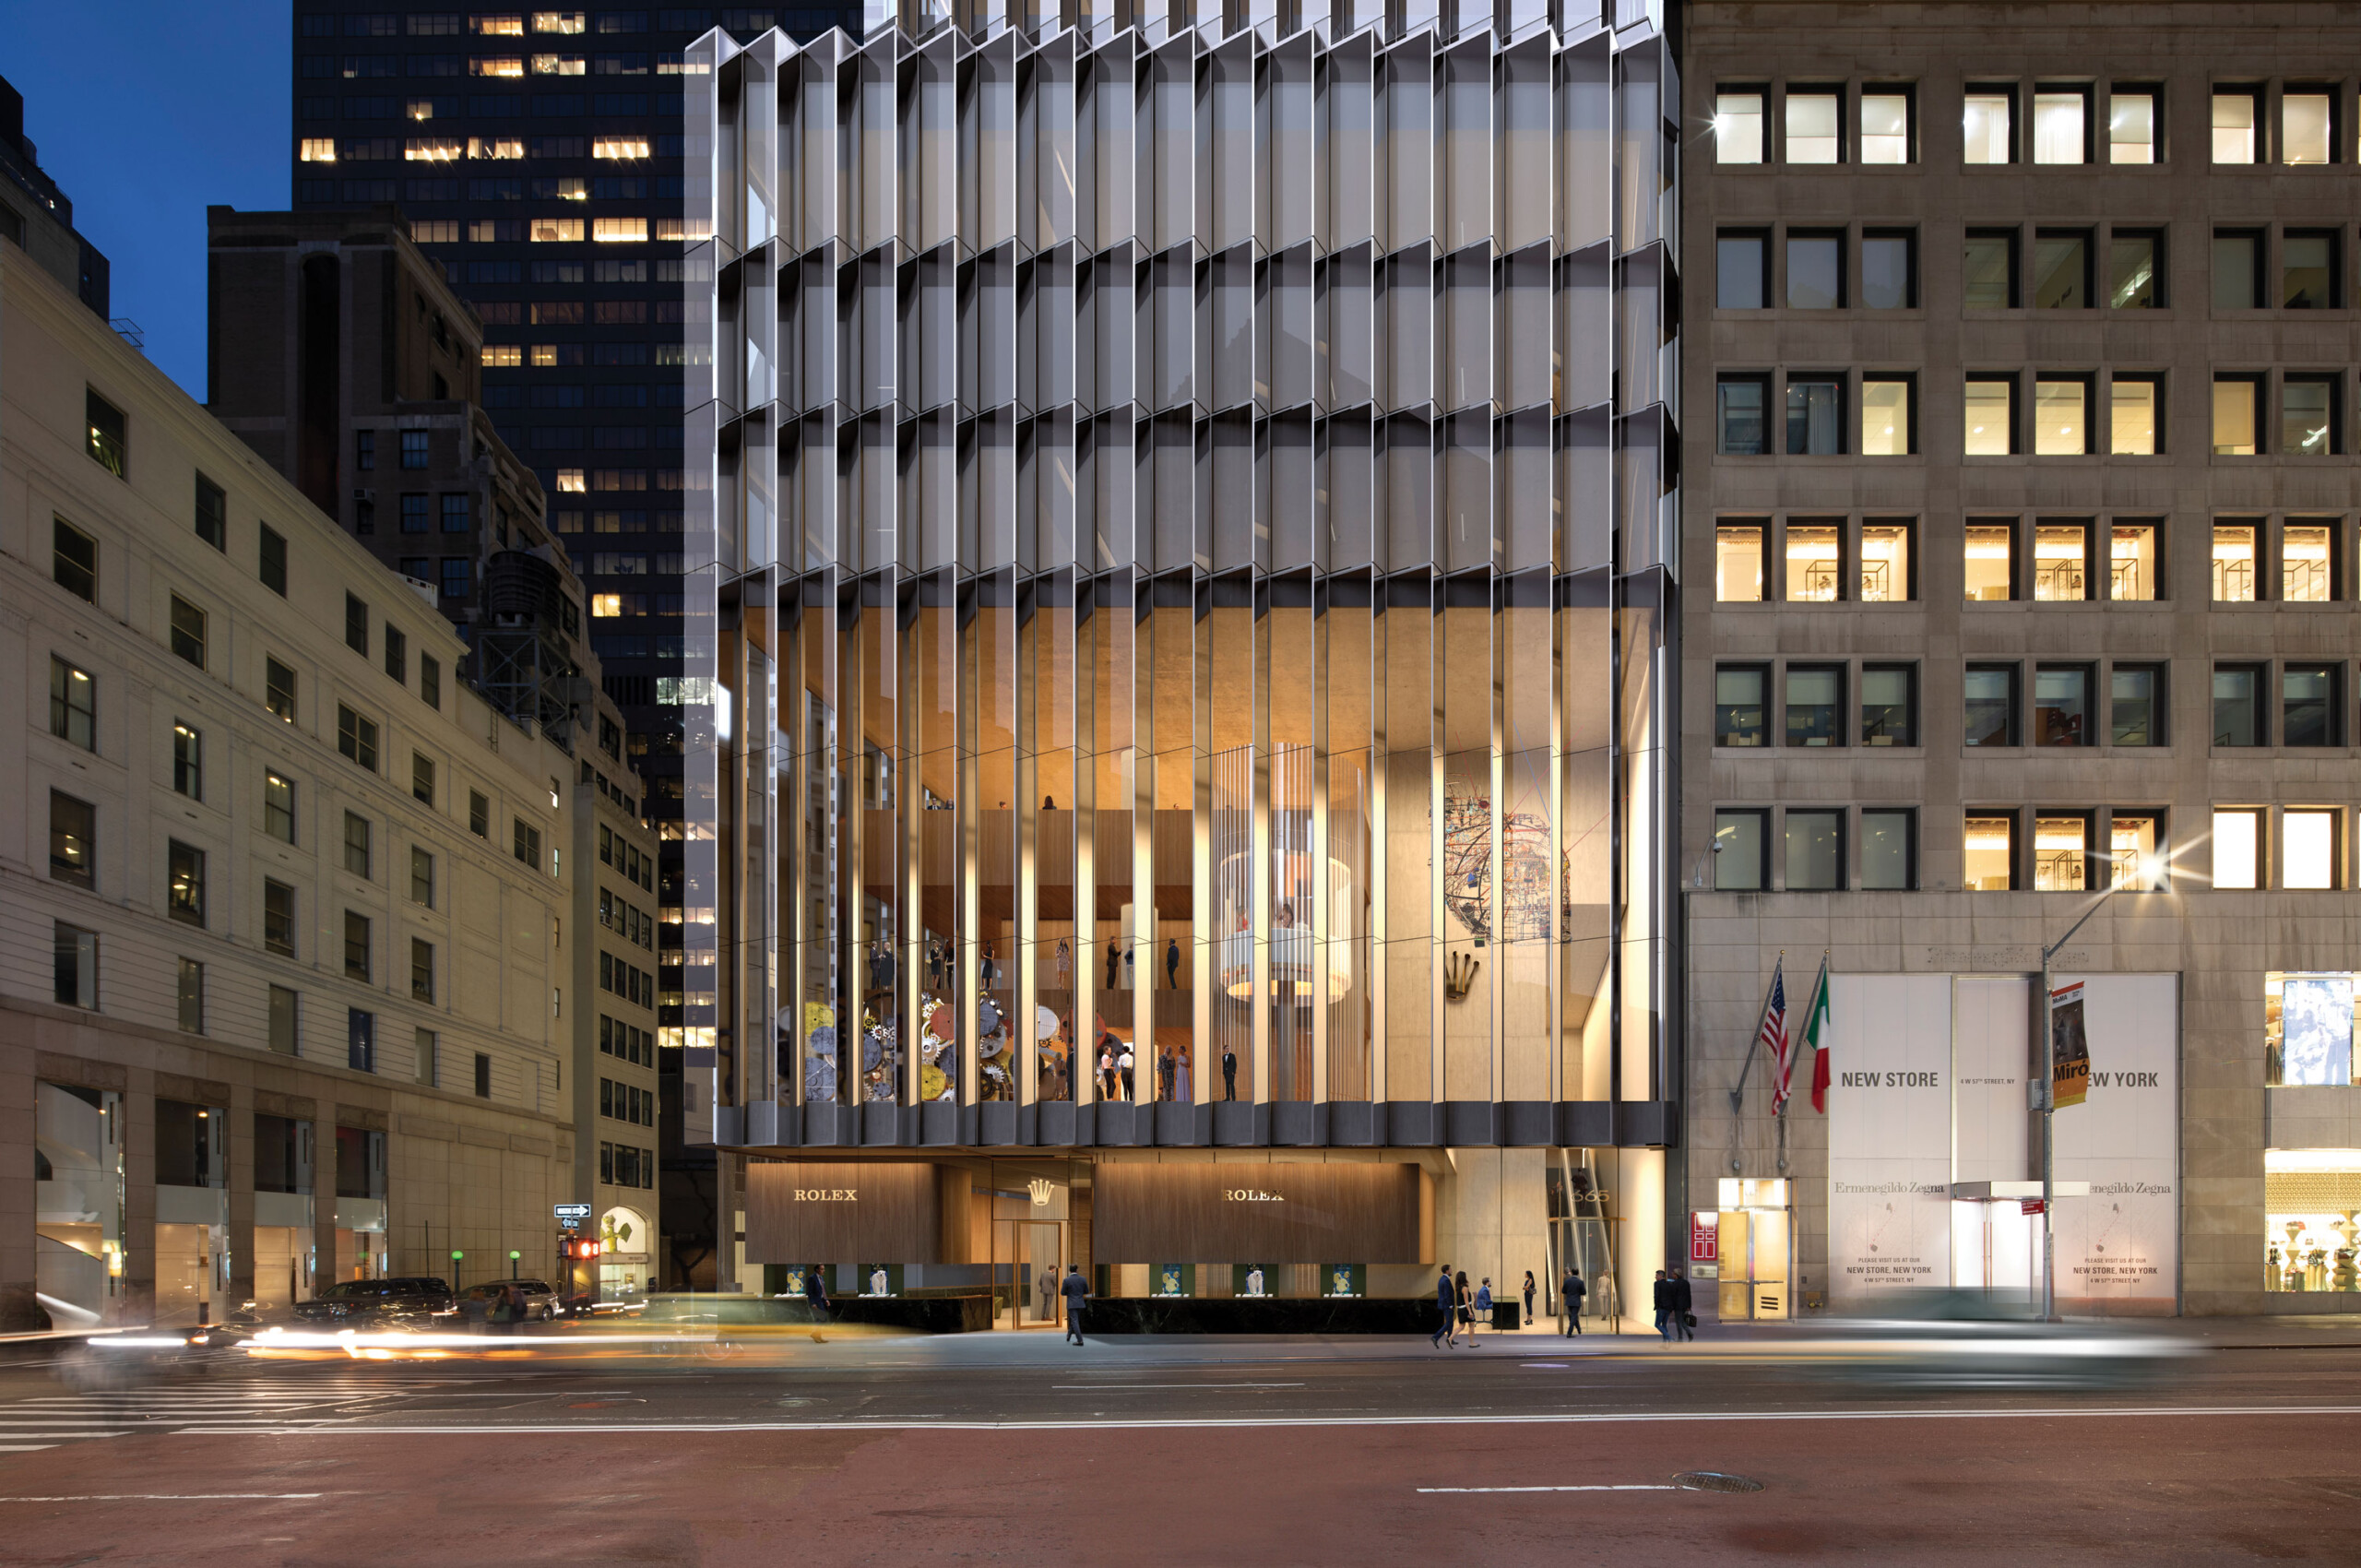 Architectural Visualization for a headquarter office building in New York by David Chipperfield Architects. 1st prize